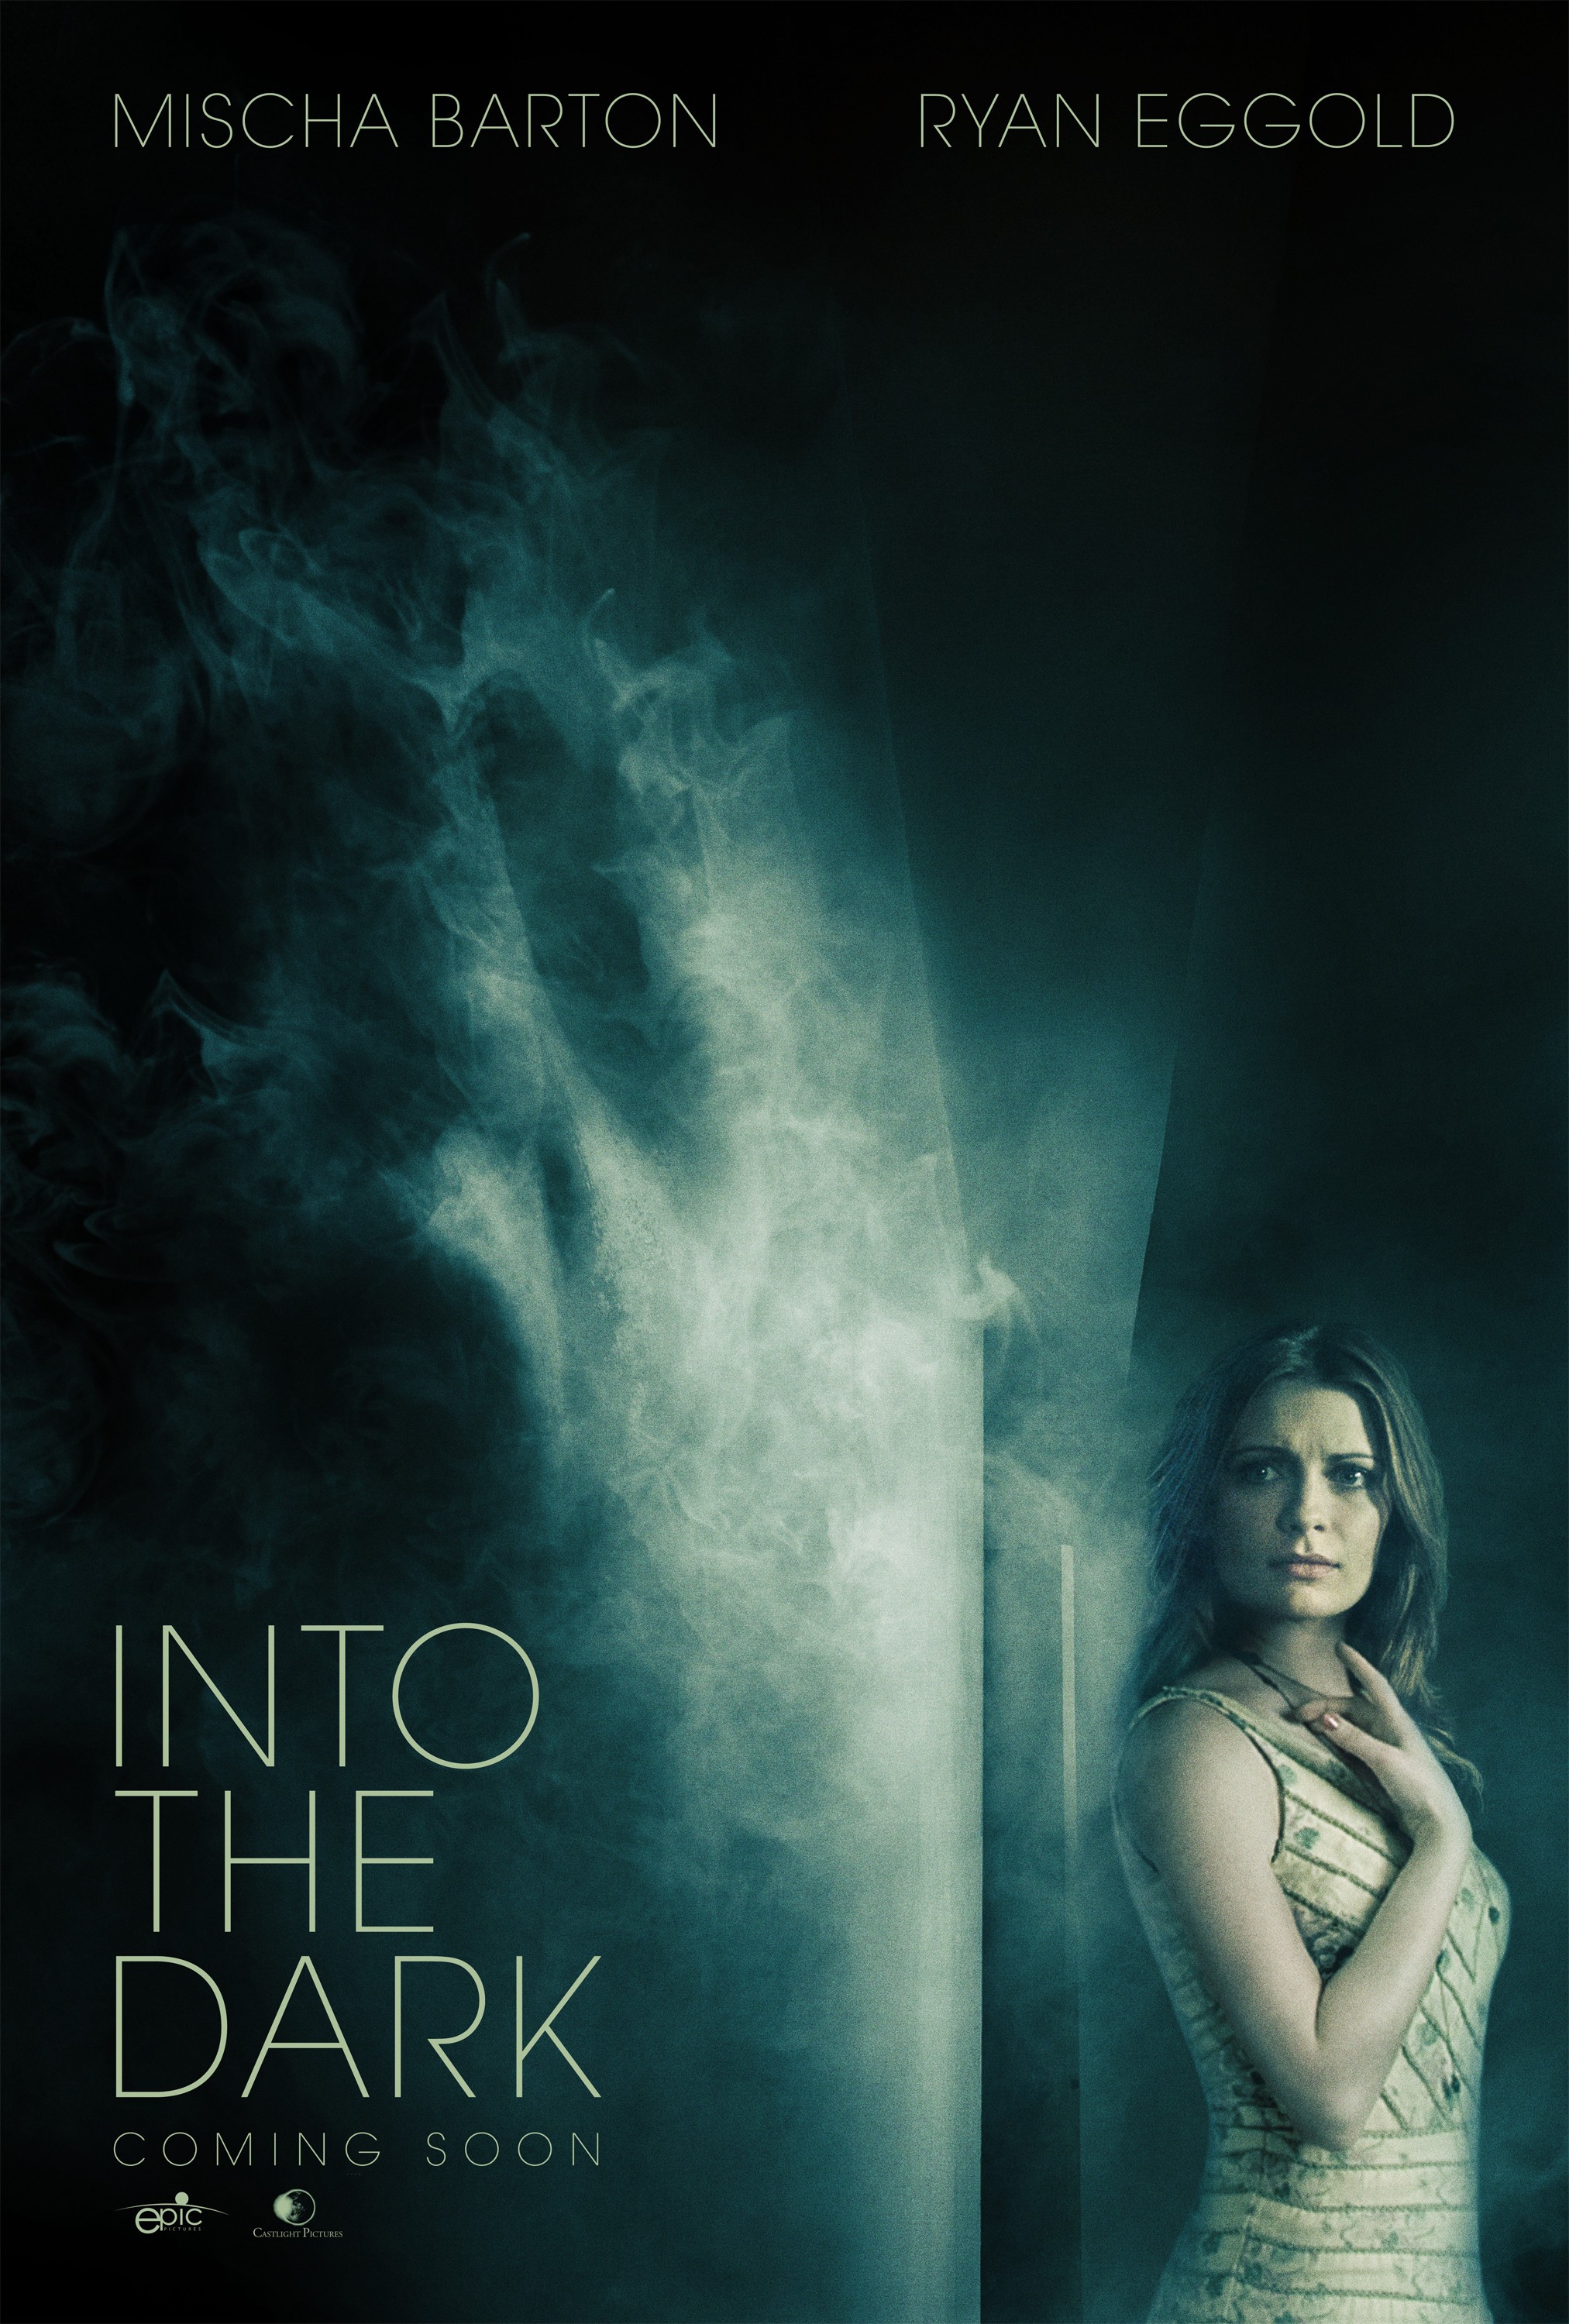 Mega Sized Movie Poster Image for Into the Dark 